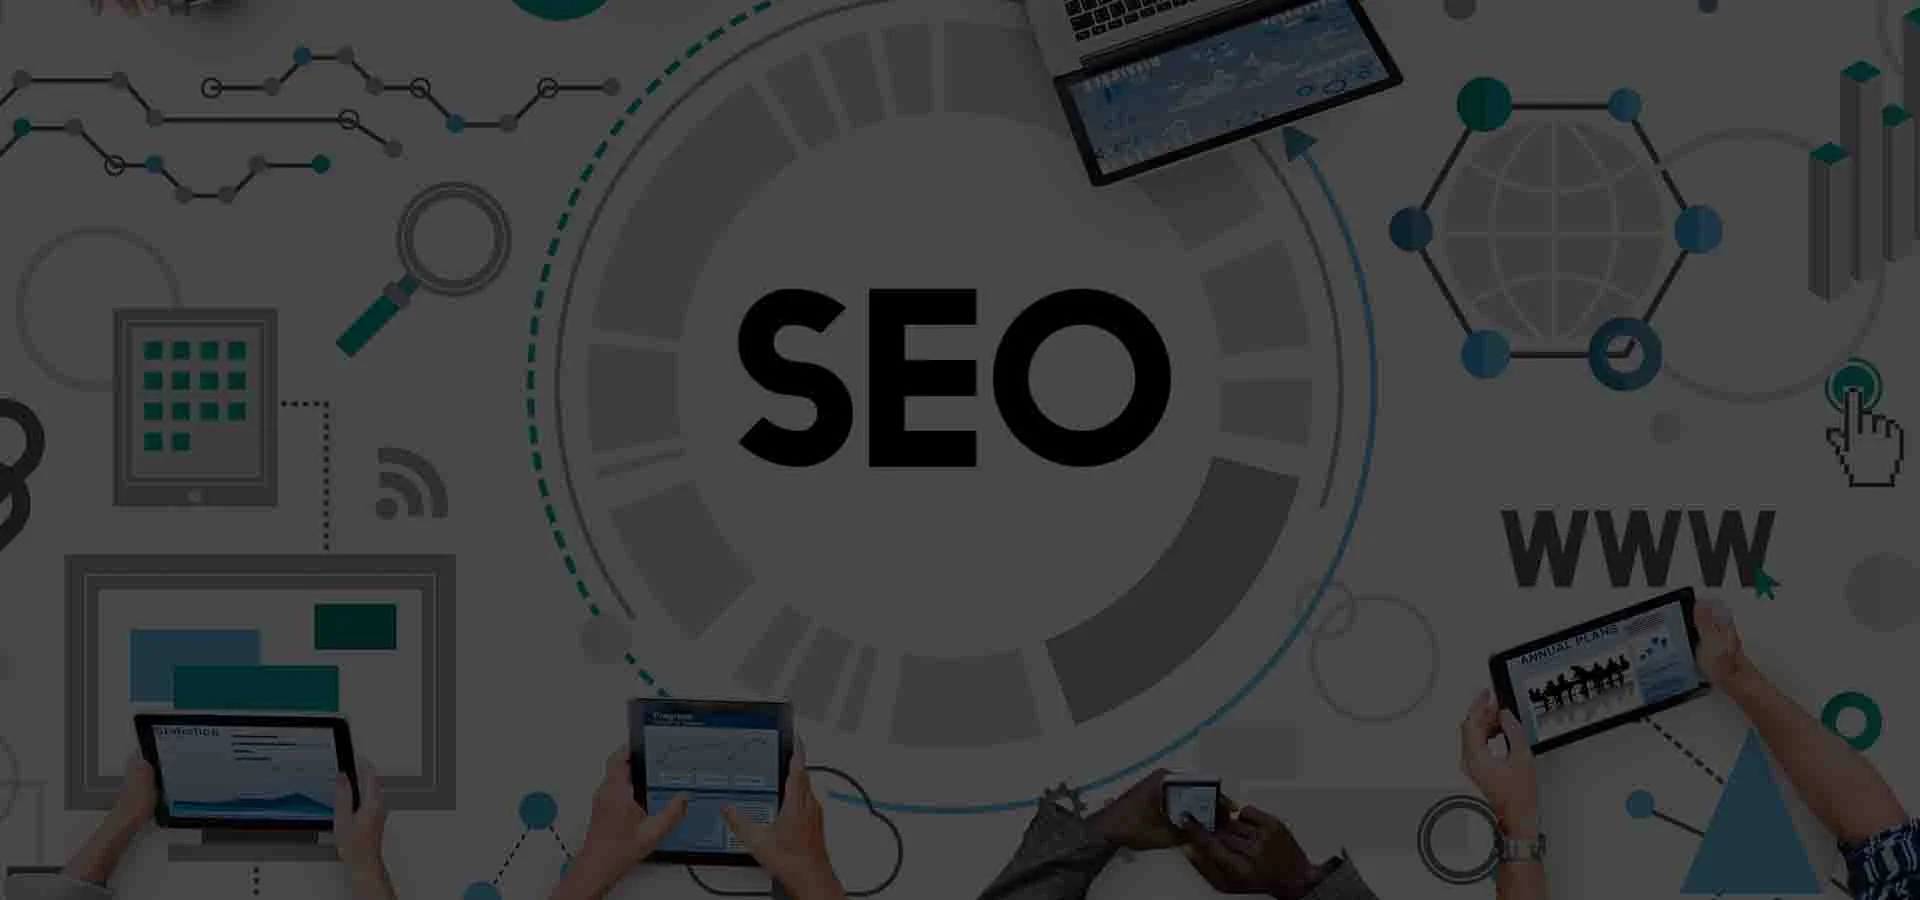 what-are-the-top-10-seo-tactics-beneficial-for-businesses-in-2020-related-blog-25